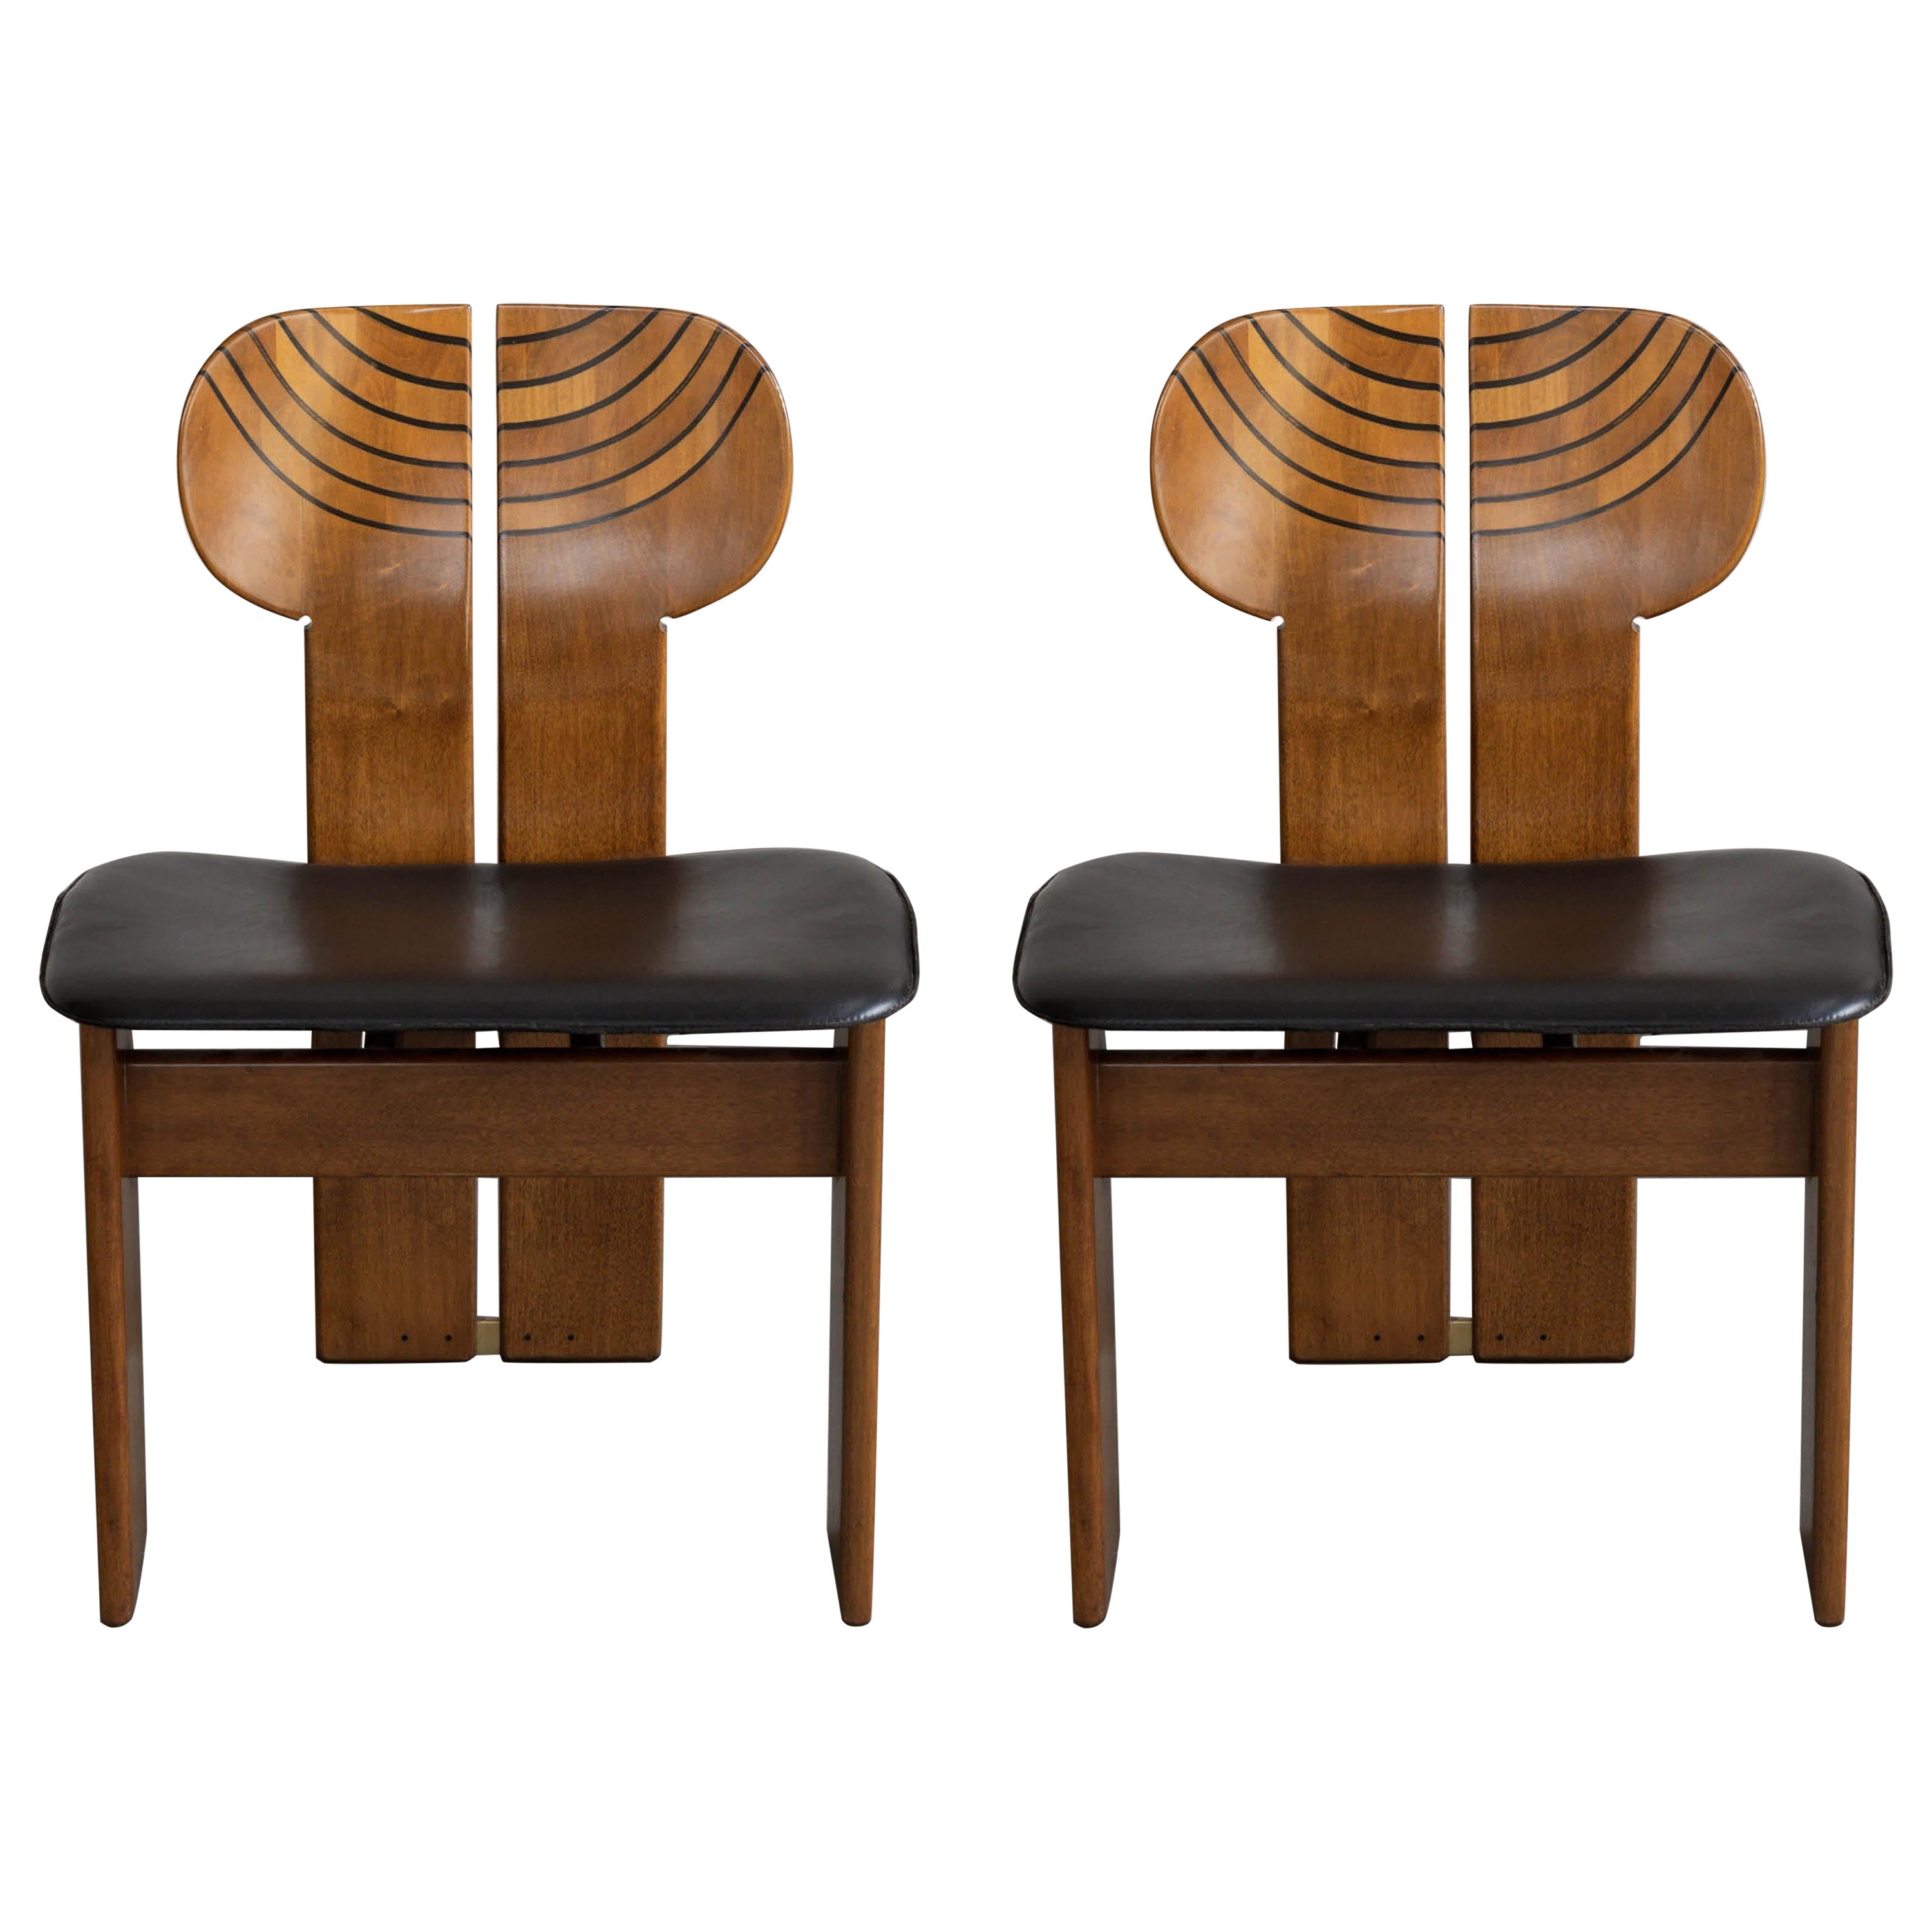 Afra & Tobia Scarpa "Africa" Dining Chairs for Maxalto, 1975, Set of 2